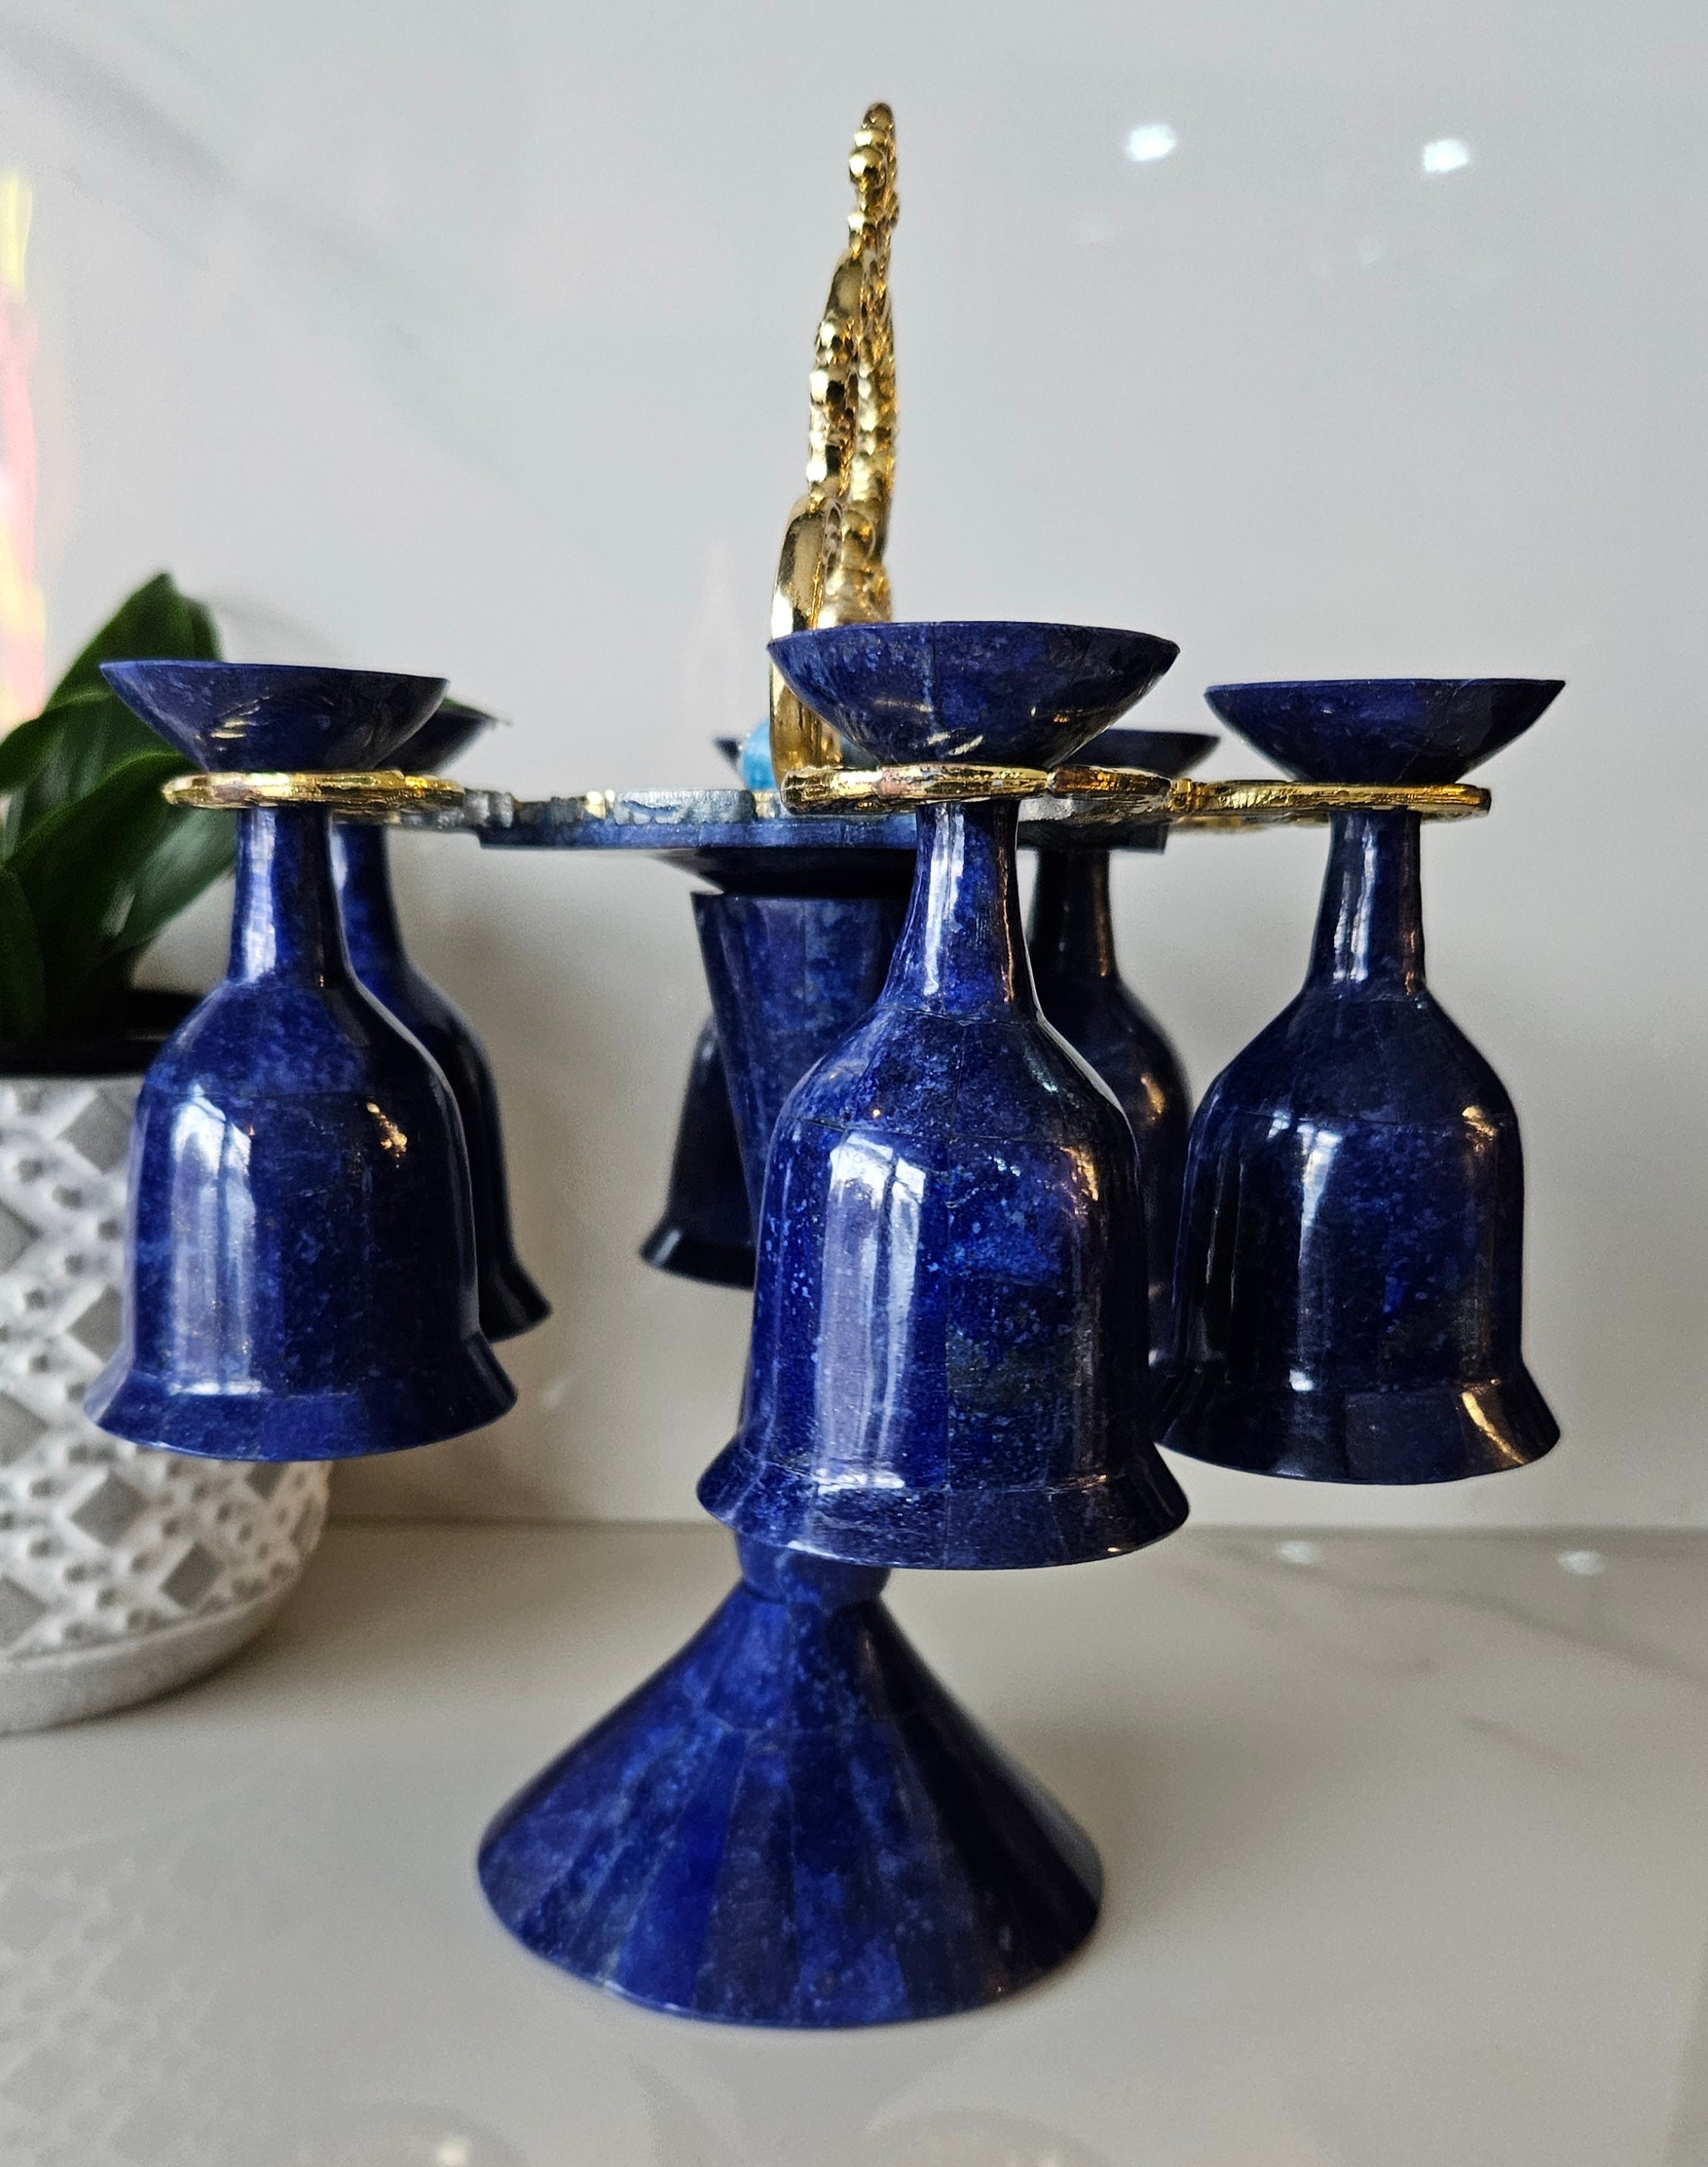 Handmade Afghan Lapis Lazuli Pálinka Cup Glasses Wine Whiskey Glass Teacup, Copper Interior, A+++ Lapis Lazuli cups, drinking cups